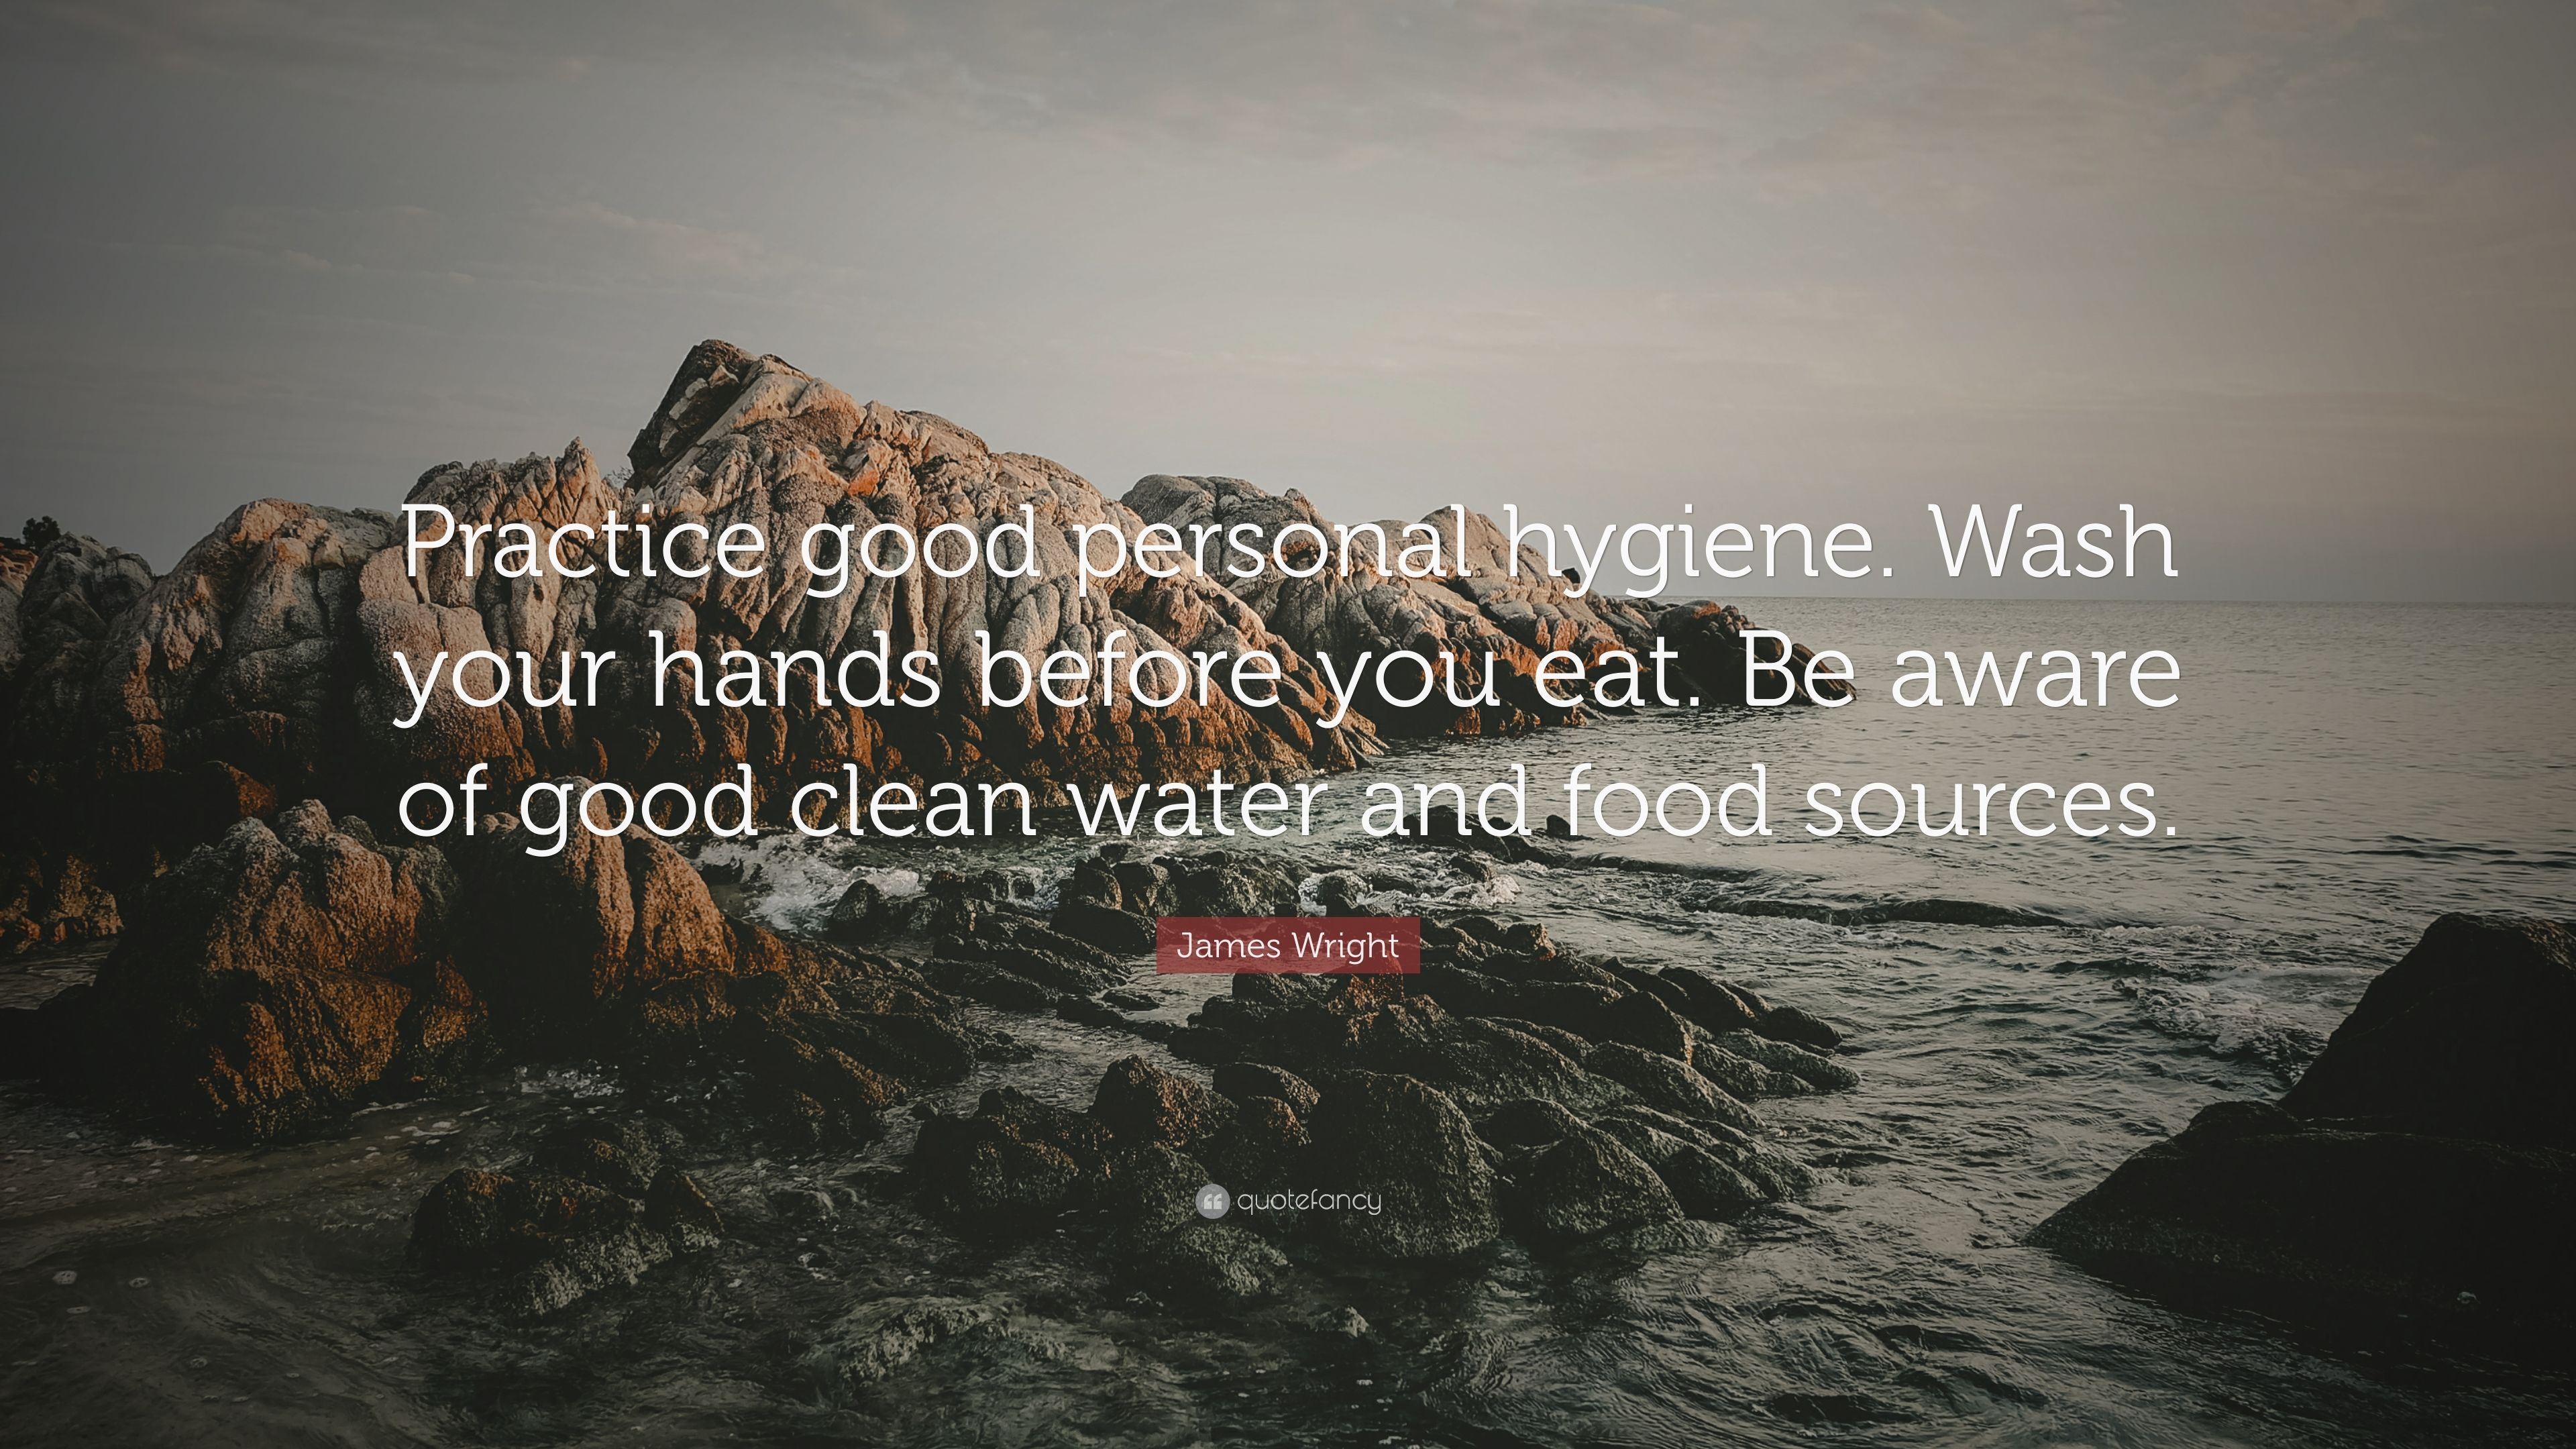 James Wright Quote: “Practice good personal hygiene. Wash your